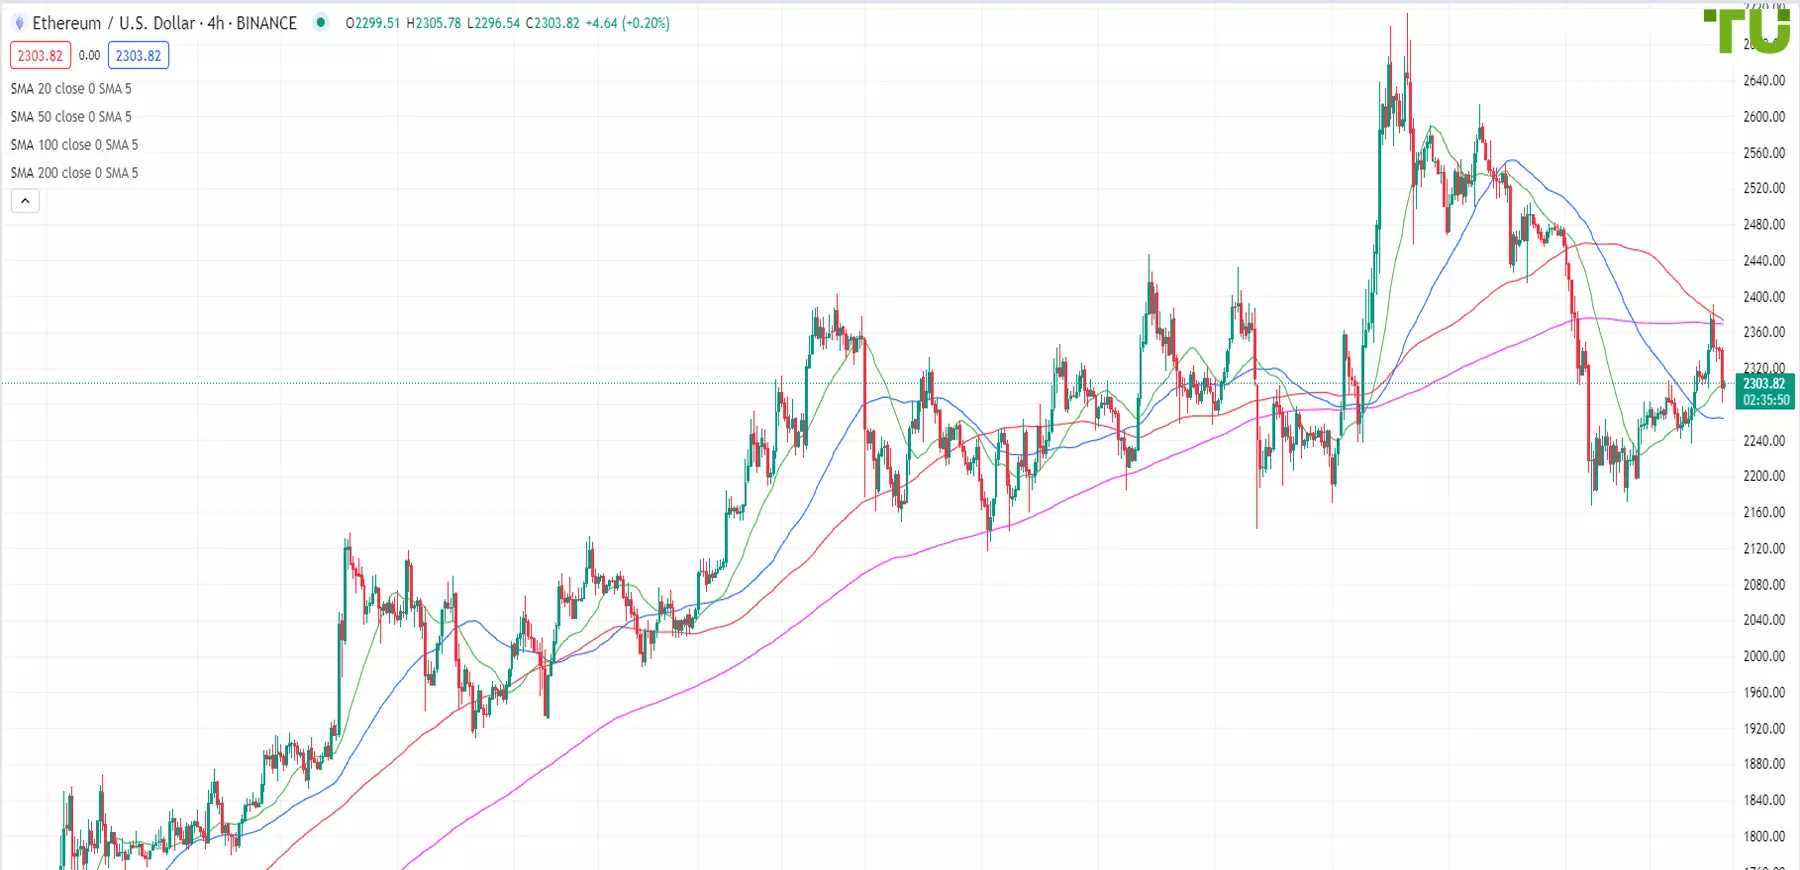 ETH/USD under pressure after recovery